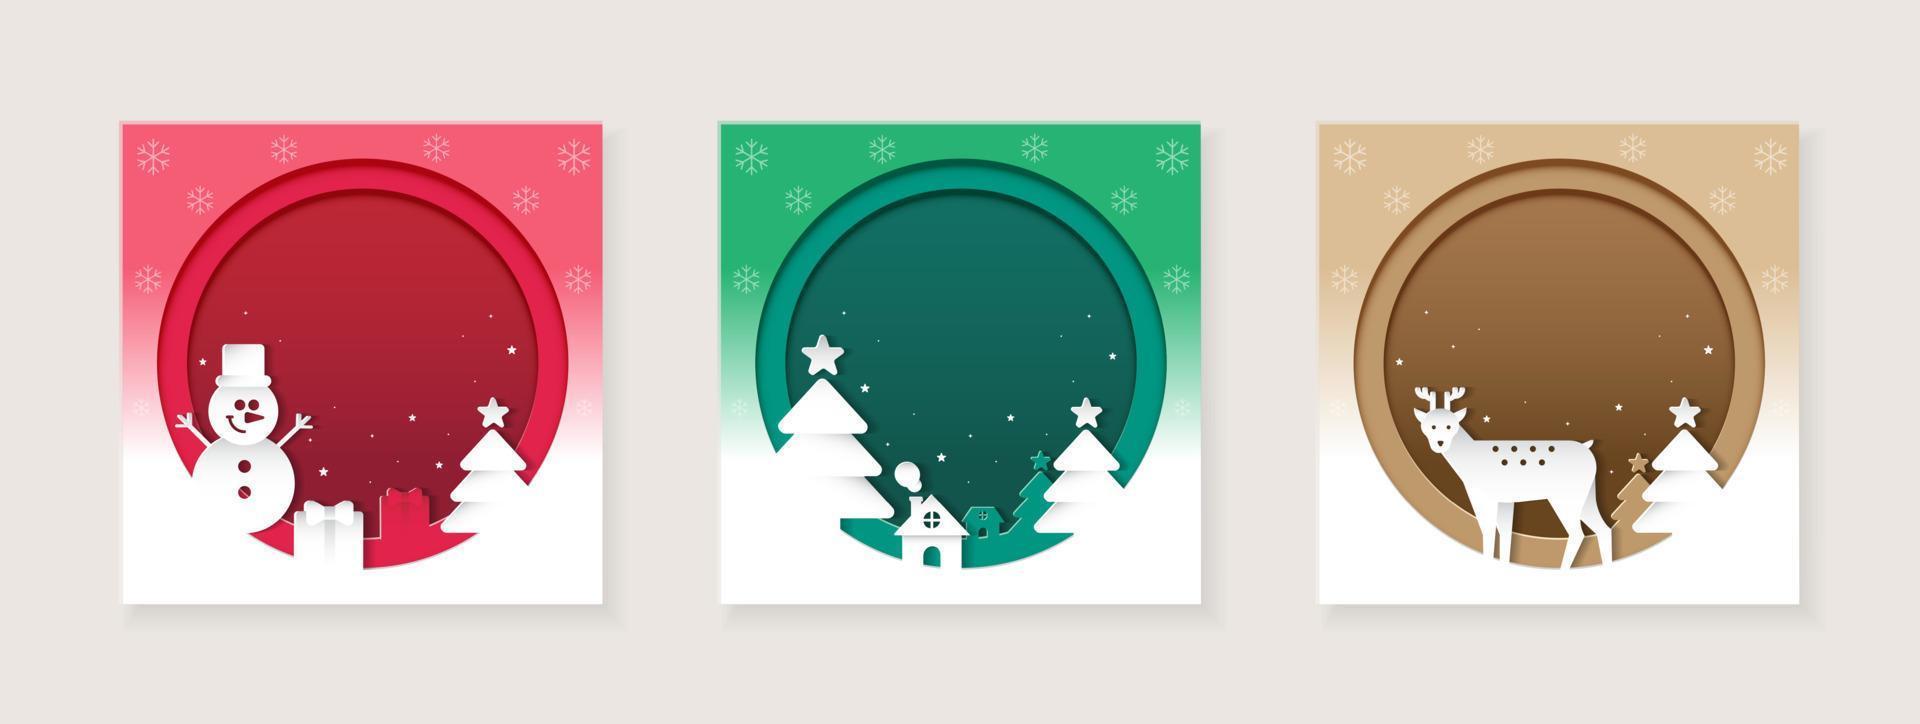 Set of Merry Christmas Happy New Year Paper Card Christmas Tree House Chimney Smoke Snowman Gift Box Present Reindeer Star Decorative Square Poster Banner Red Green Brown BG Copy Space Template Frame vector